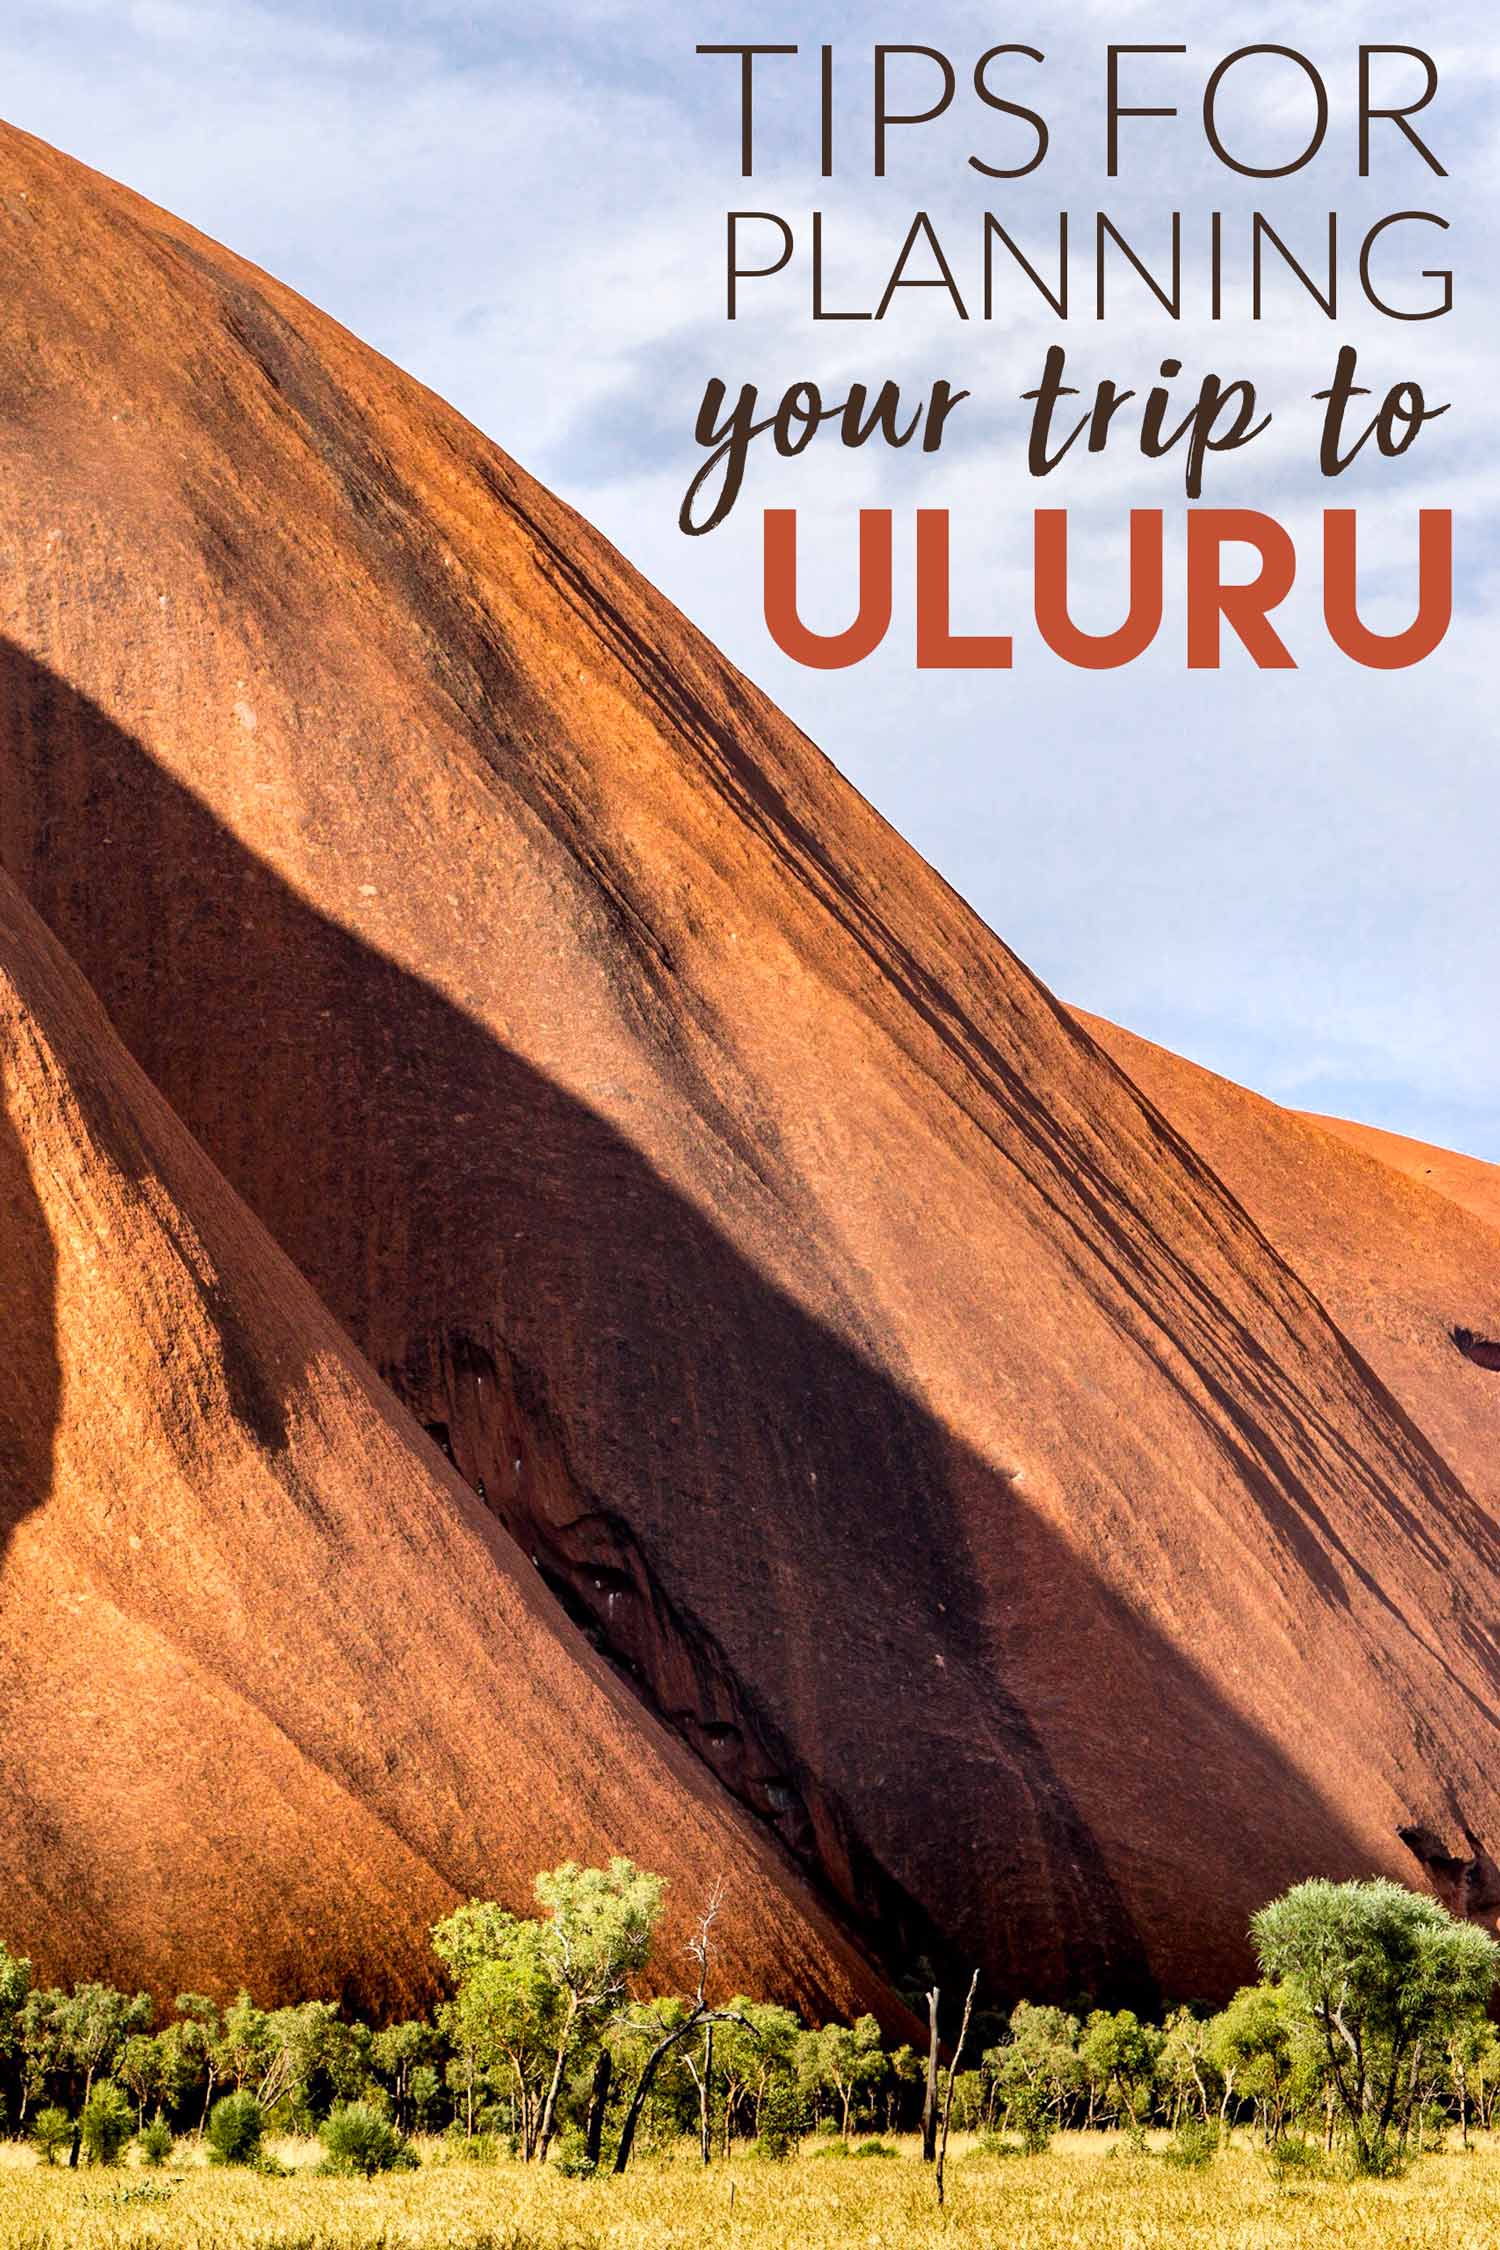 Tips for Planning your trip to uluru